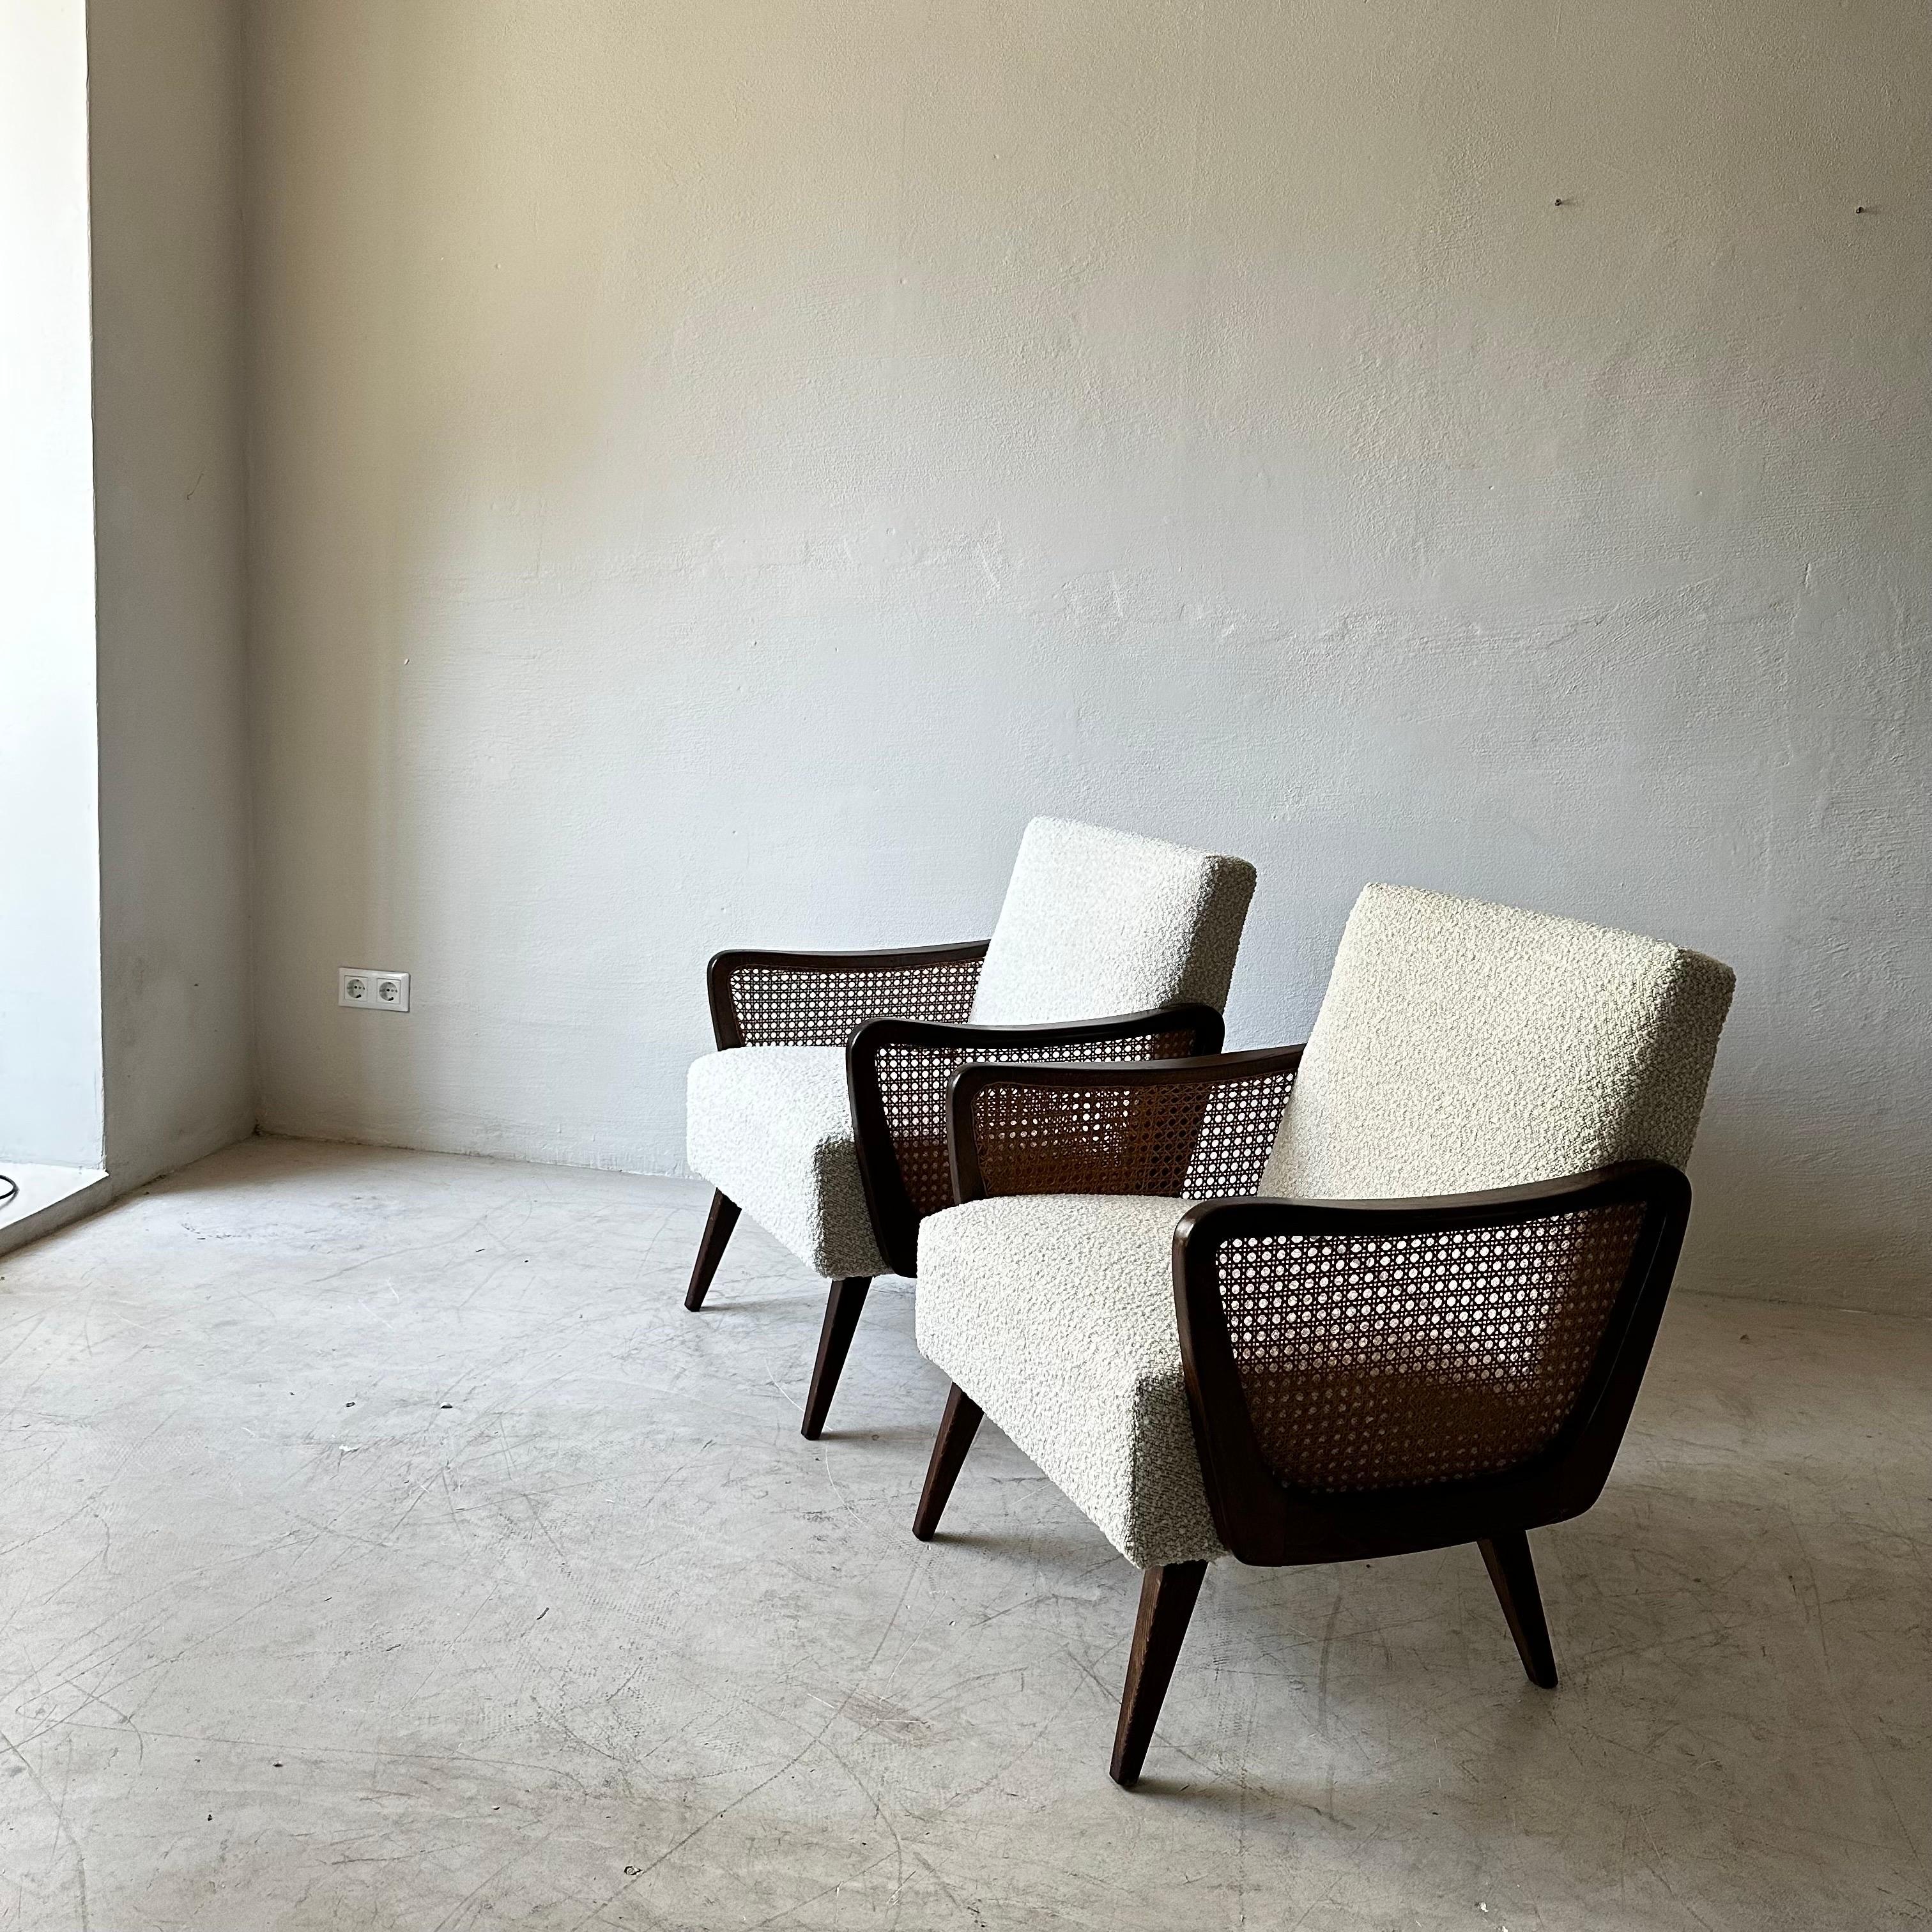 Austrian Arm Chairs in Boucle and Wicker, 1950s For Sale 3